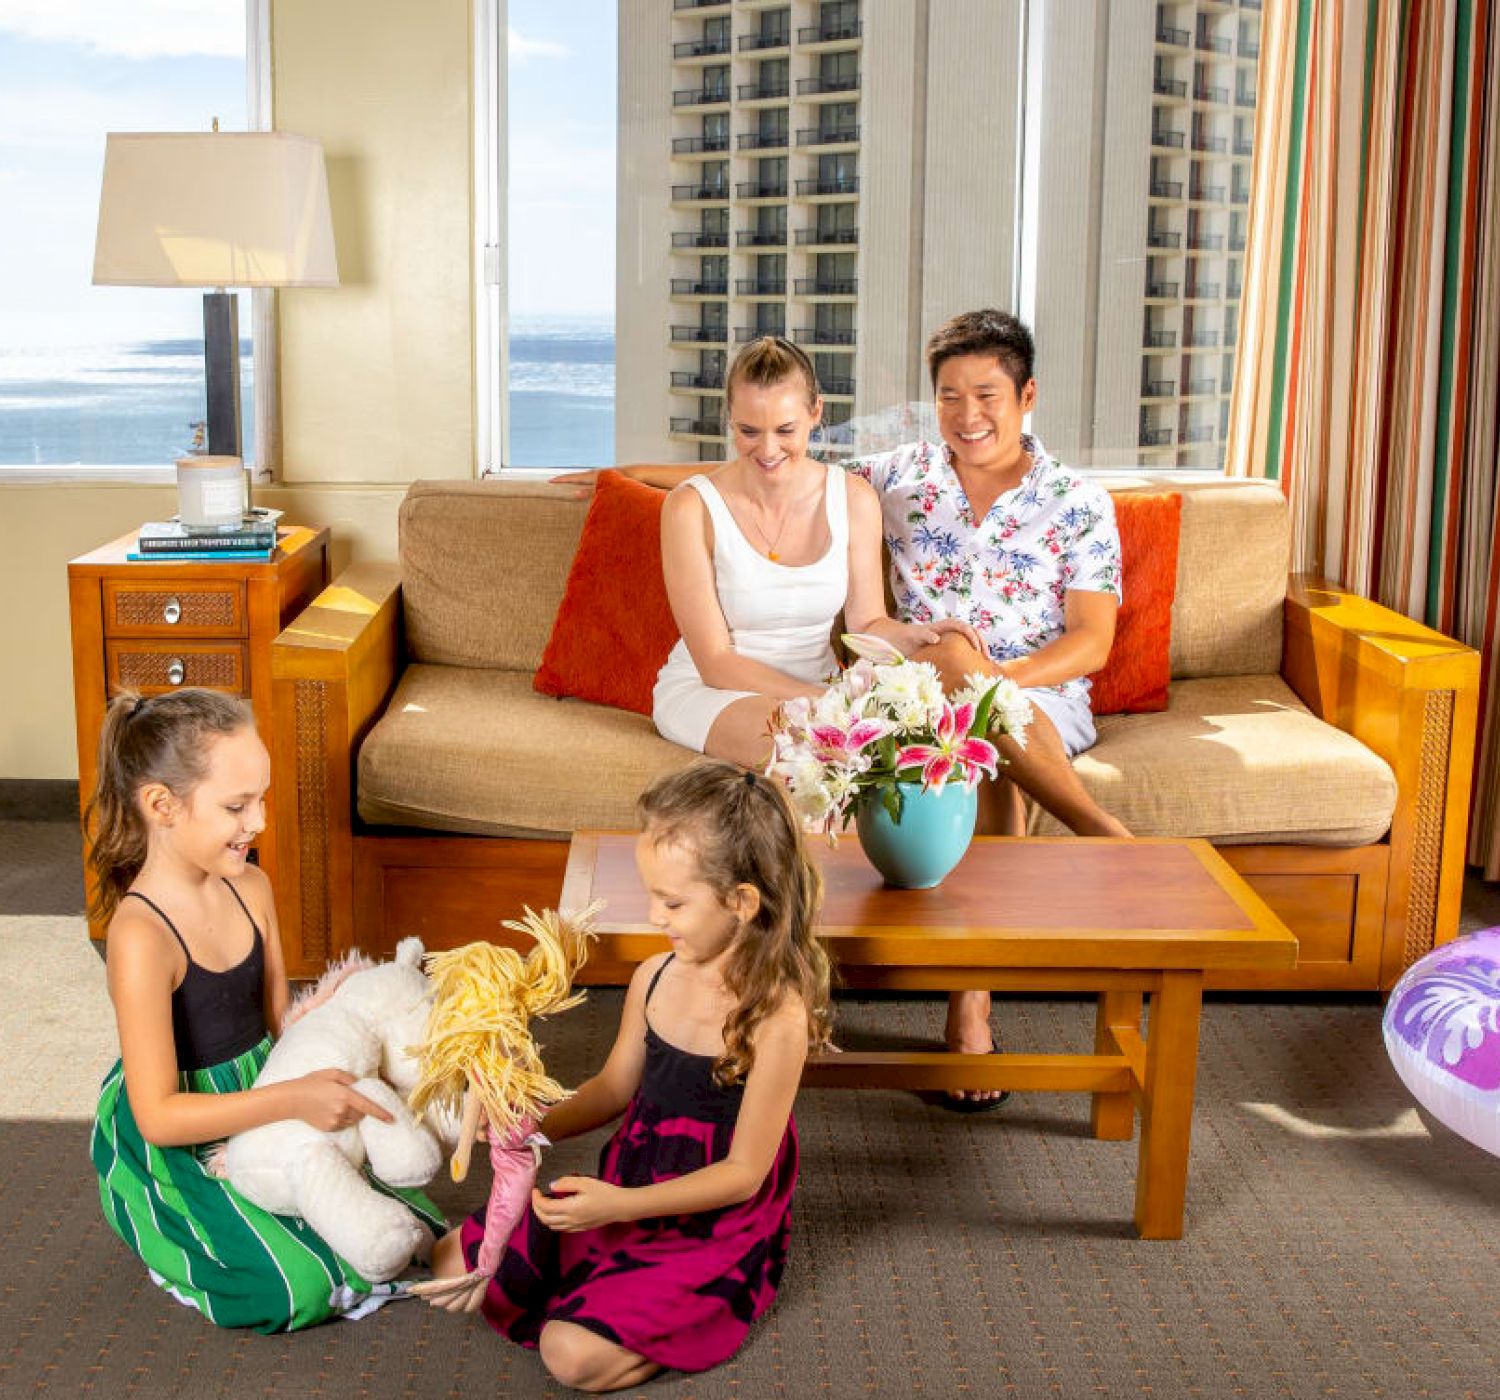 A group of people are in a bright room with a sea view. Two adults are on a couch, while two children sit on the floor playing with toys.